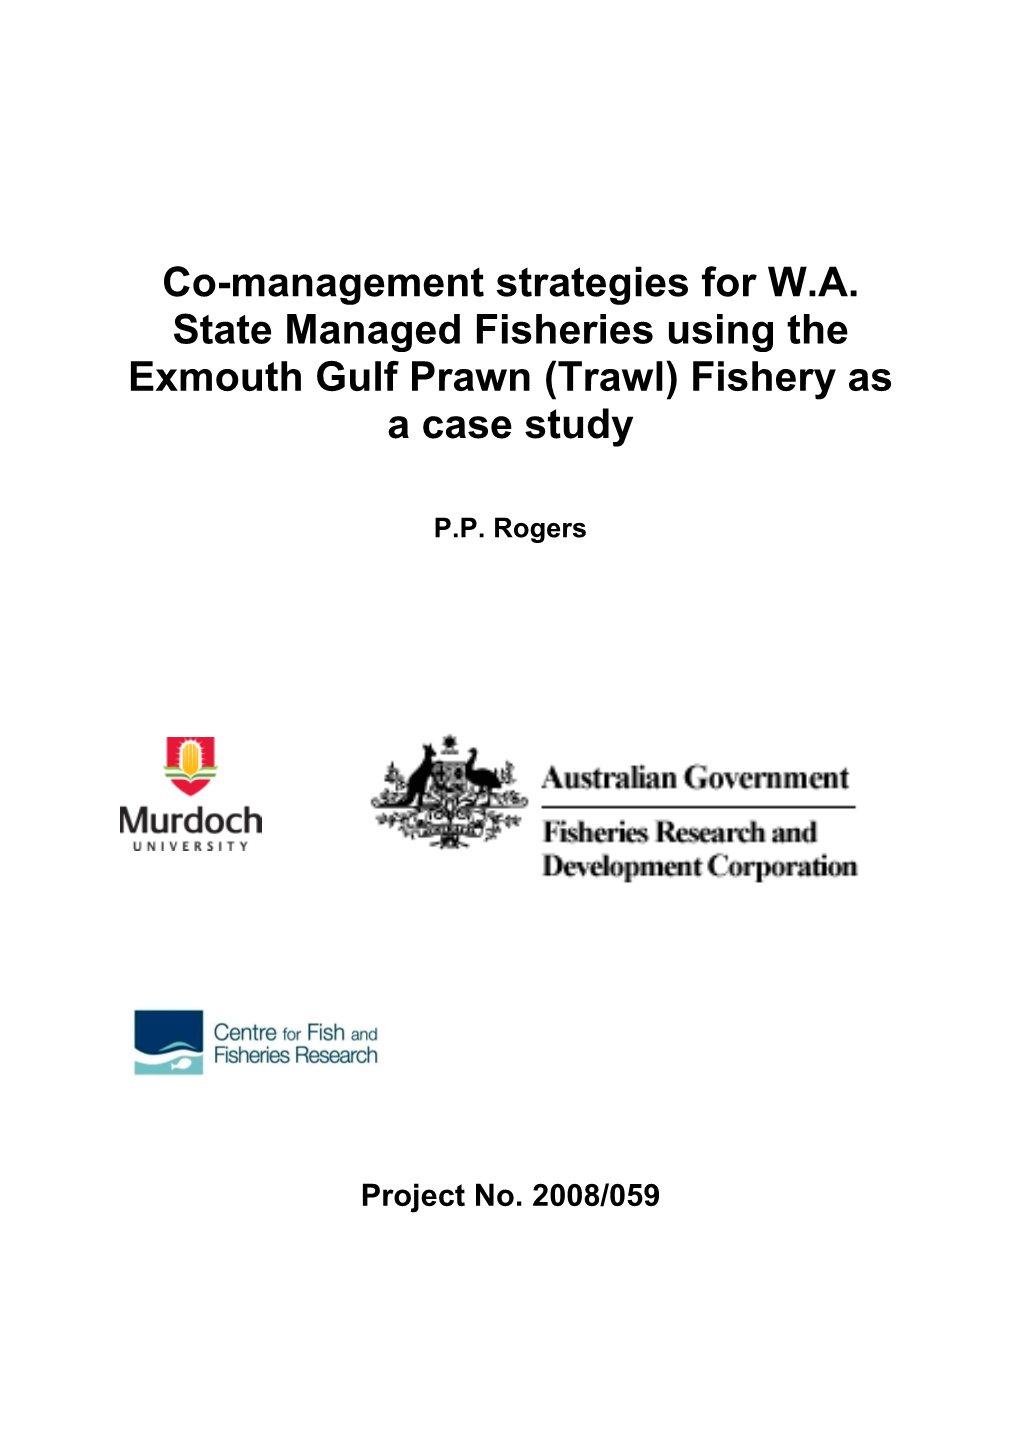 Co-Management Strategies for W.A. State Managed Fisheries Using the Exmouth Gulf Prawn (Trawl) Fishery As a Case Study